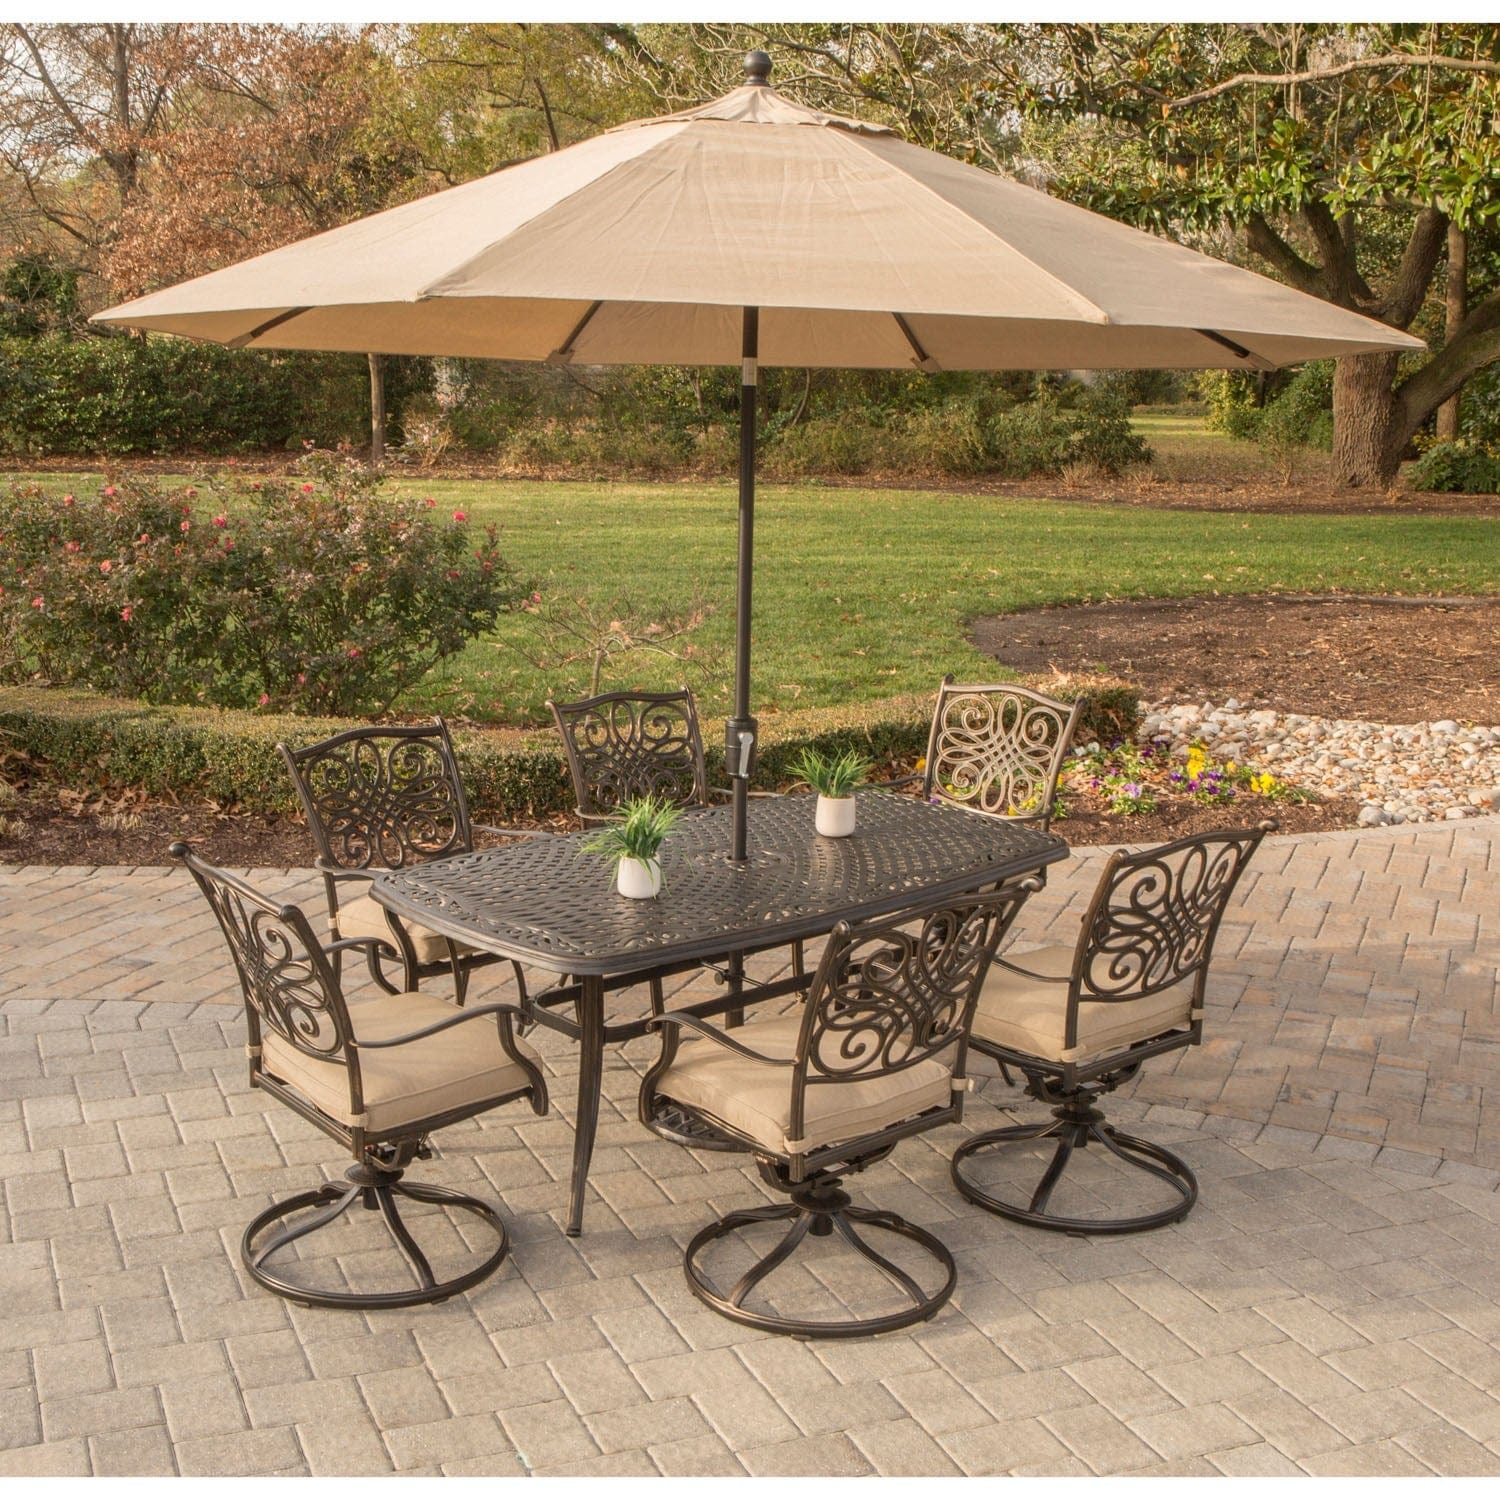 Hanover Patio Furniture Hanover - Traditions 7-Piece Dining Set in Tan with 72 x 38 in. Dining Table, 9 Ft. Table Umbrella, and Umbrella Stand